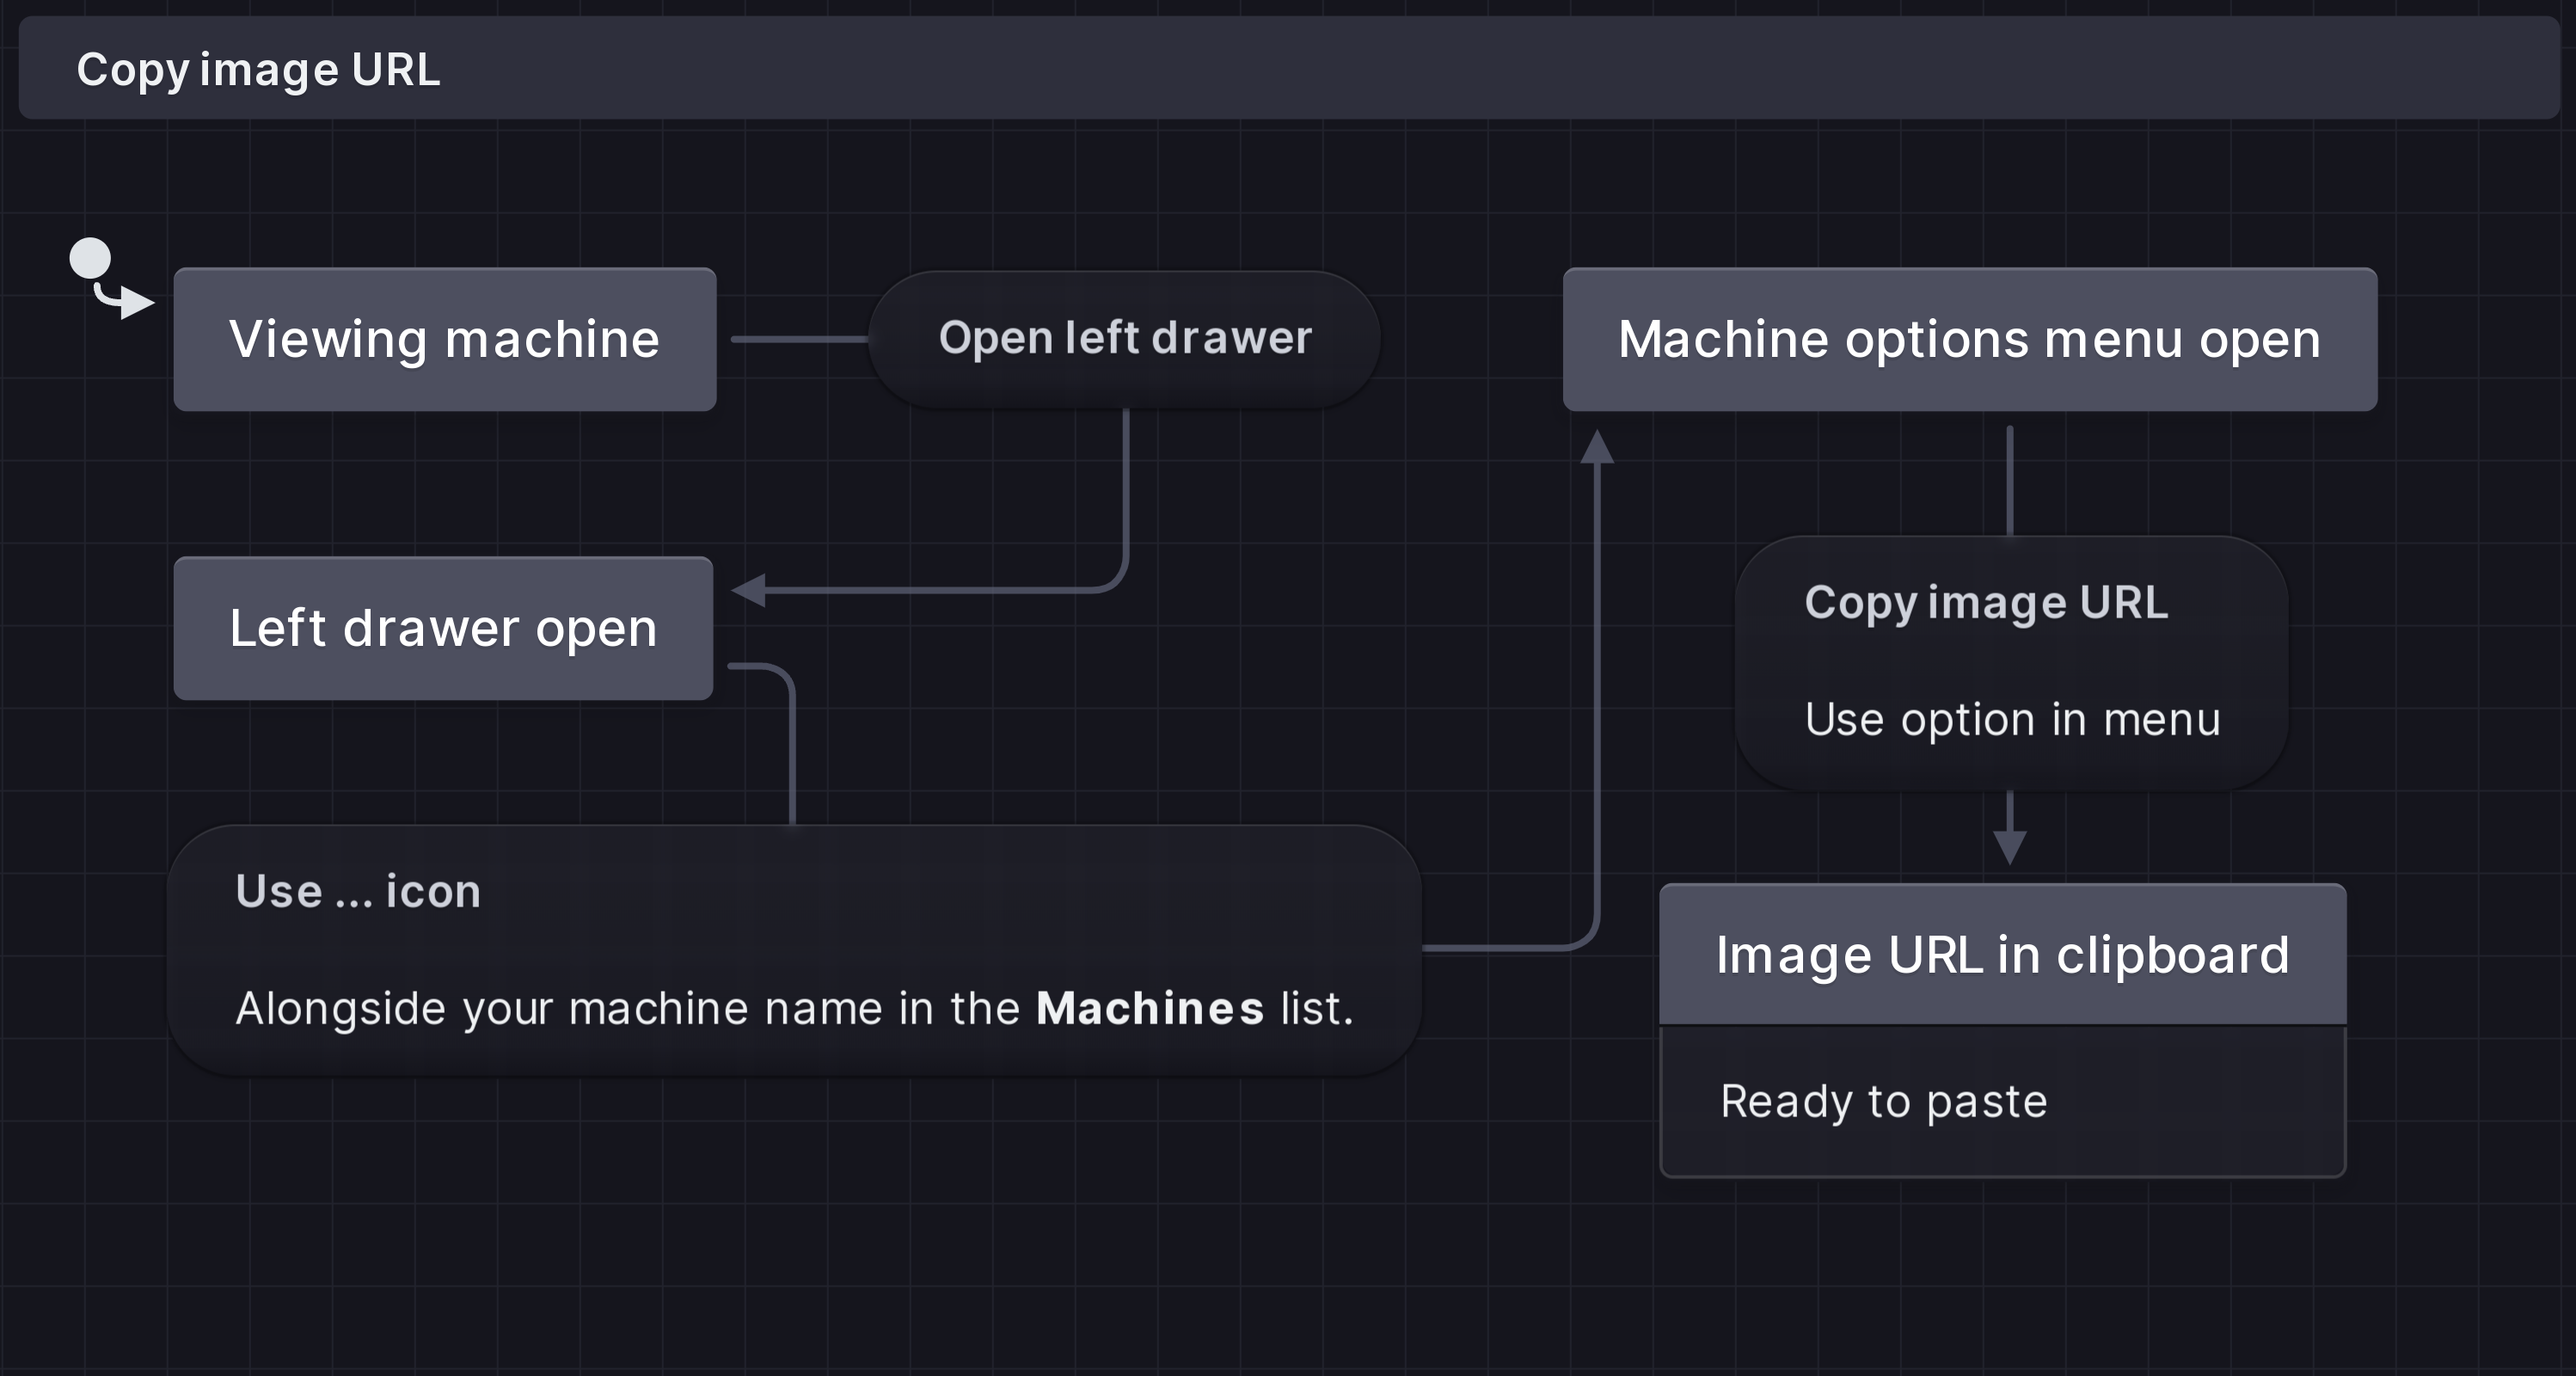 State machine for the Copy image URL flow. An initial state of Viewing machine which transitions to Left drawer open via an event of Open left drawer. The use … icon event transitions from left drawer open to Machine options menu open.